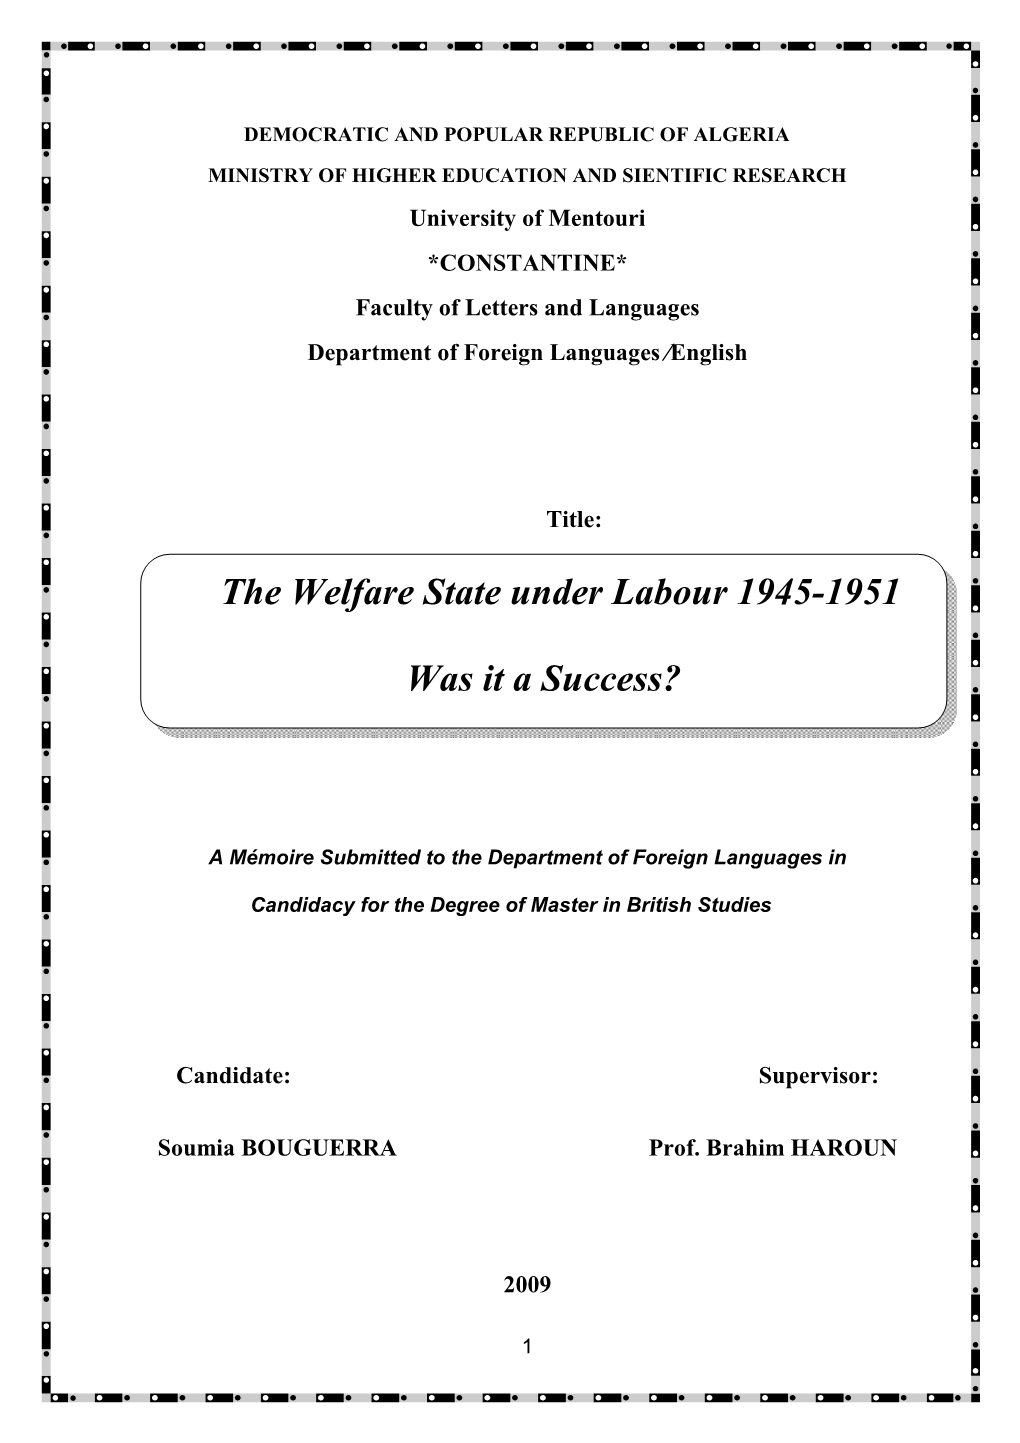 The Welfare State Under Labour 1945-1951 Was It a Success?